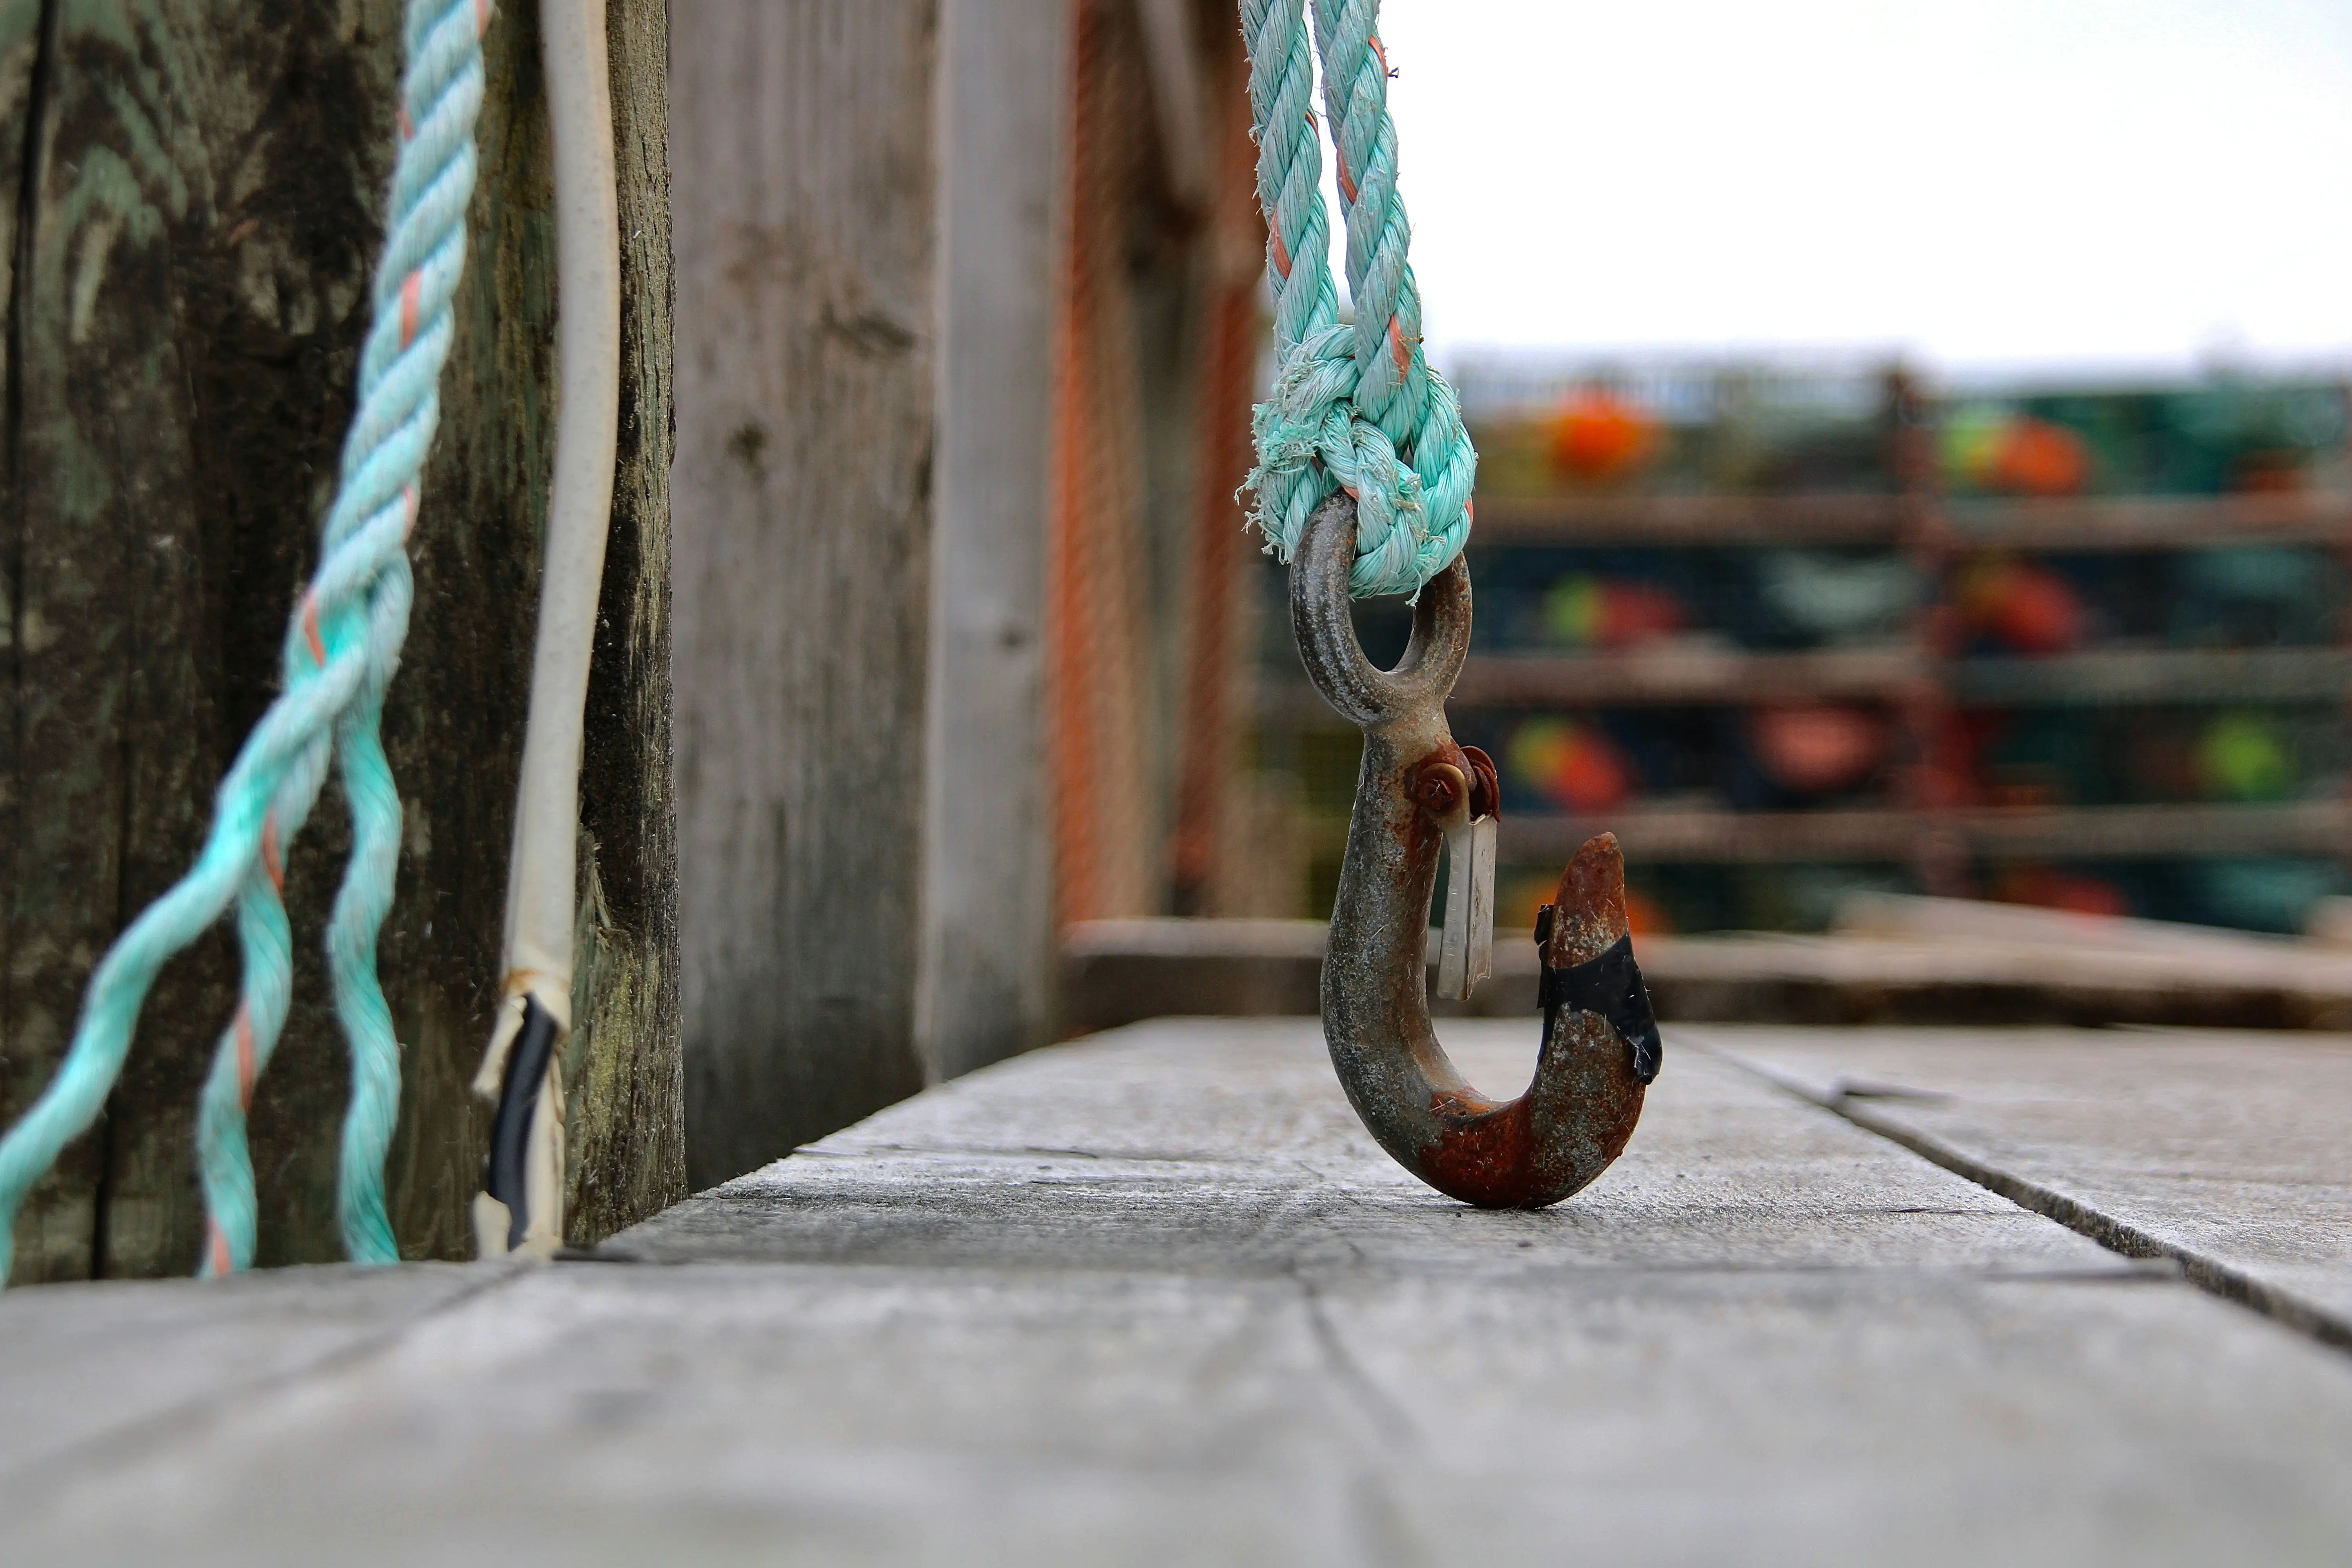 Discussion on the application of winch clevis hook in marine engineering